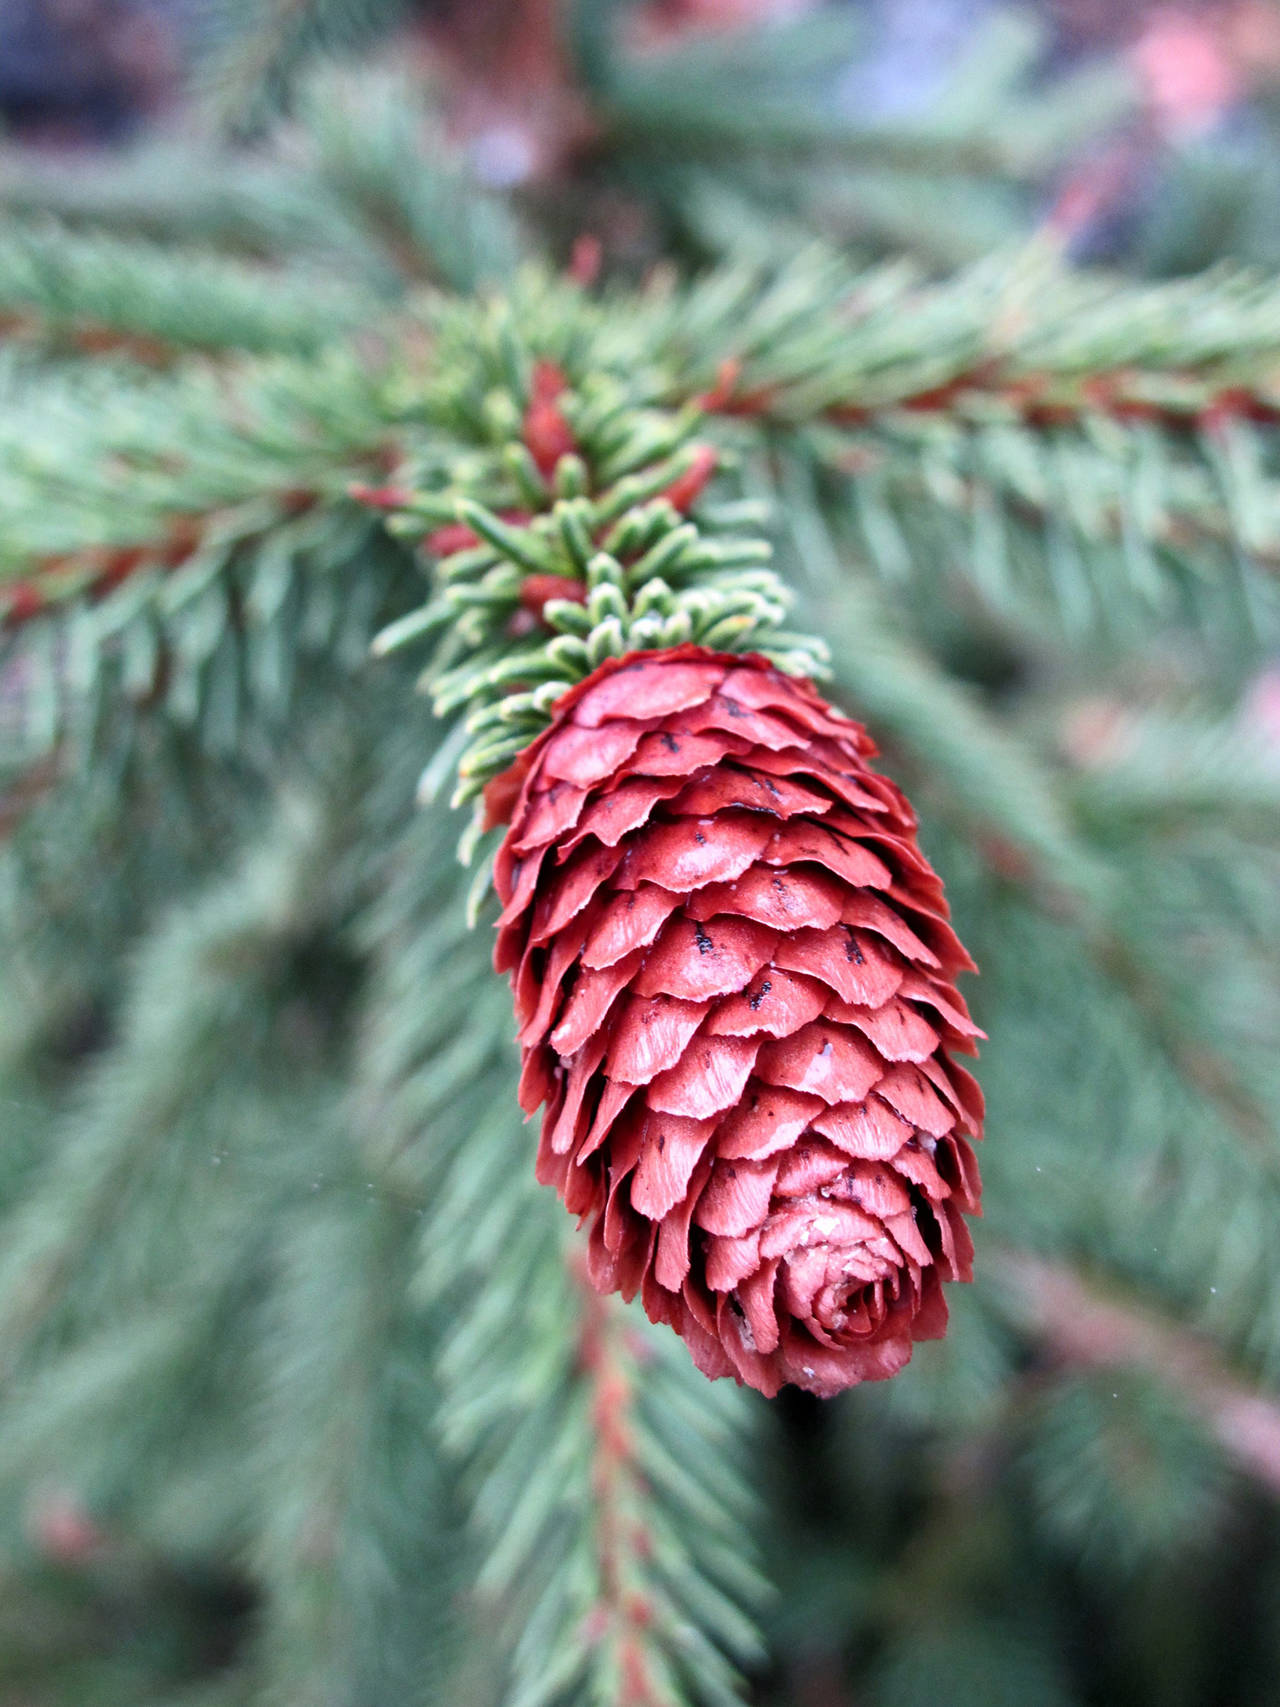 Courtesy Beth Day Waters                                The Norway spruce has the largest cones of any spruce, borne on the ends of downturned branchlets.